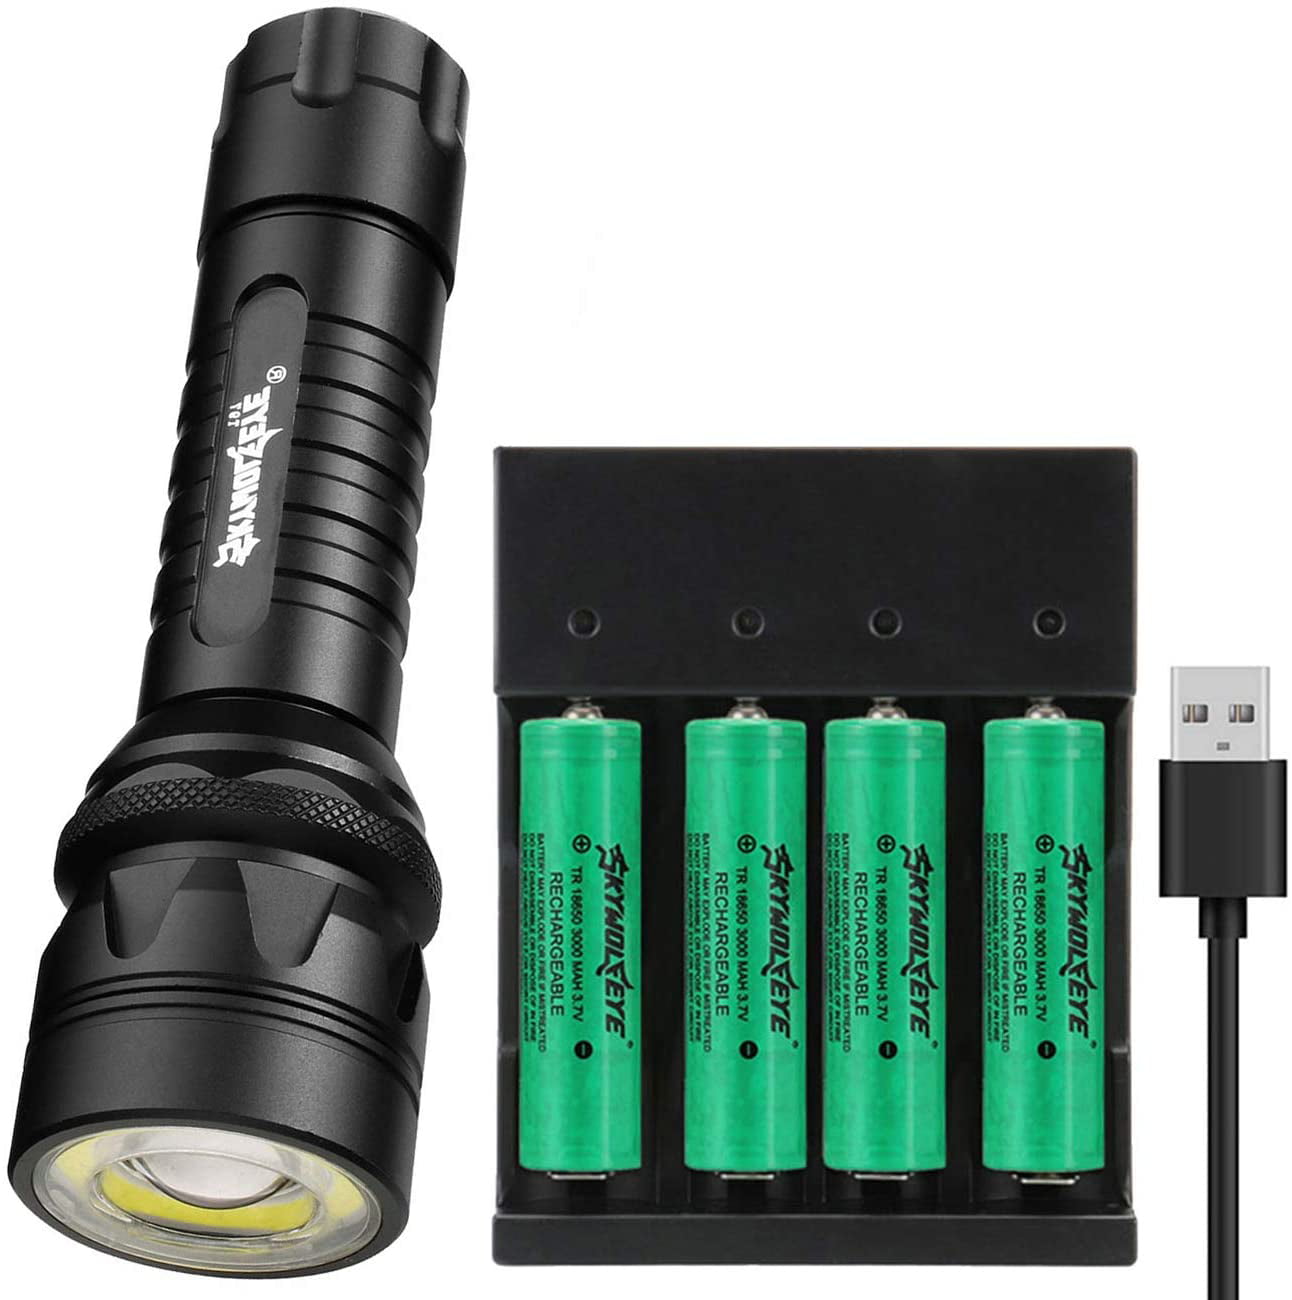 350000LM T6 LED Rechargeable High Power Torch Flashlight Light Lamps&Charger Set 